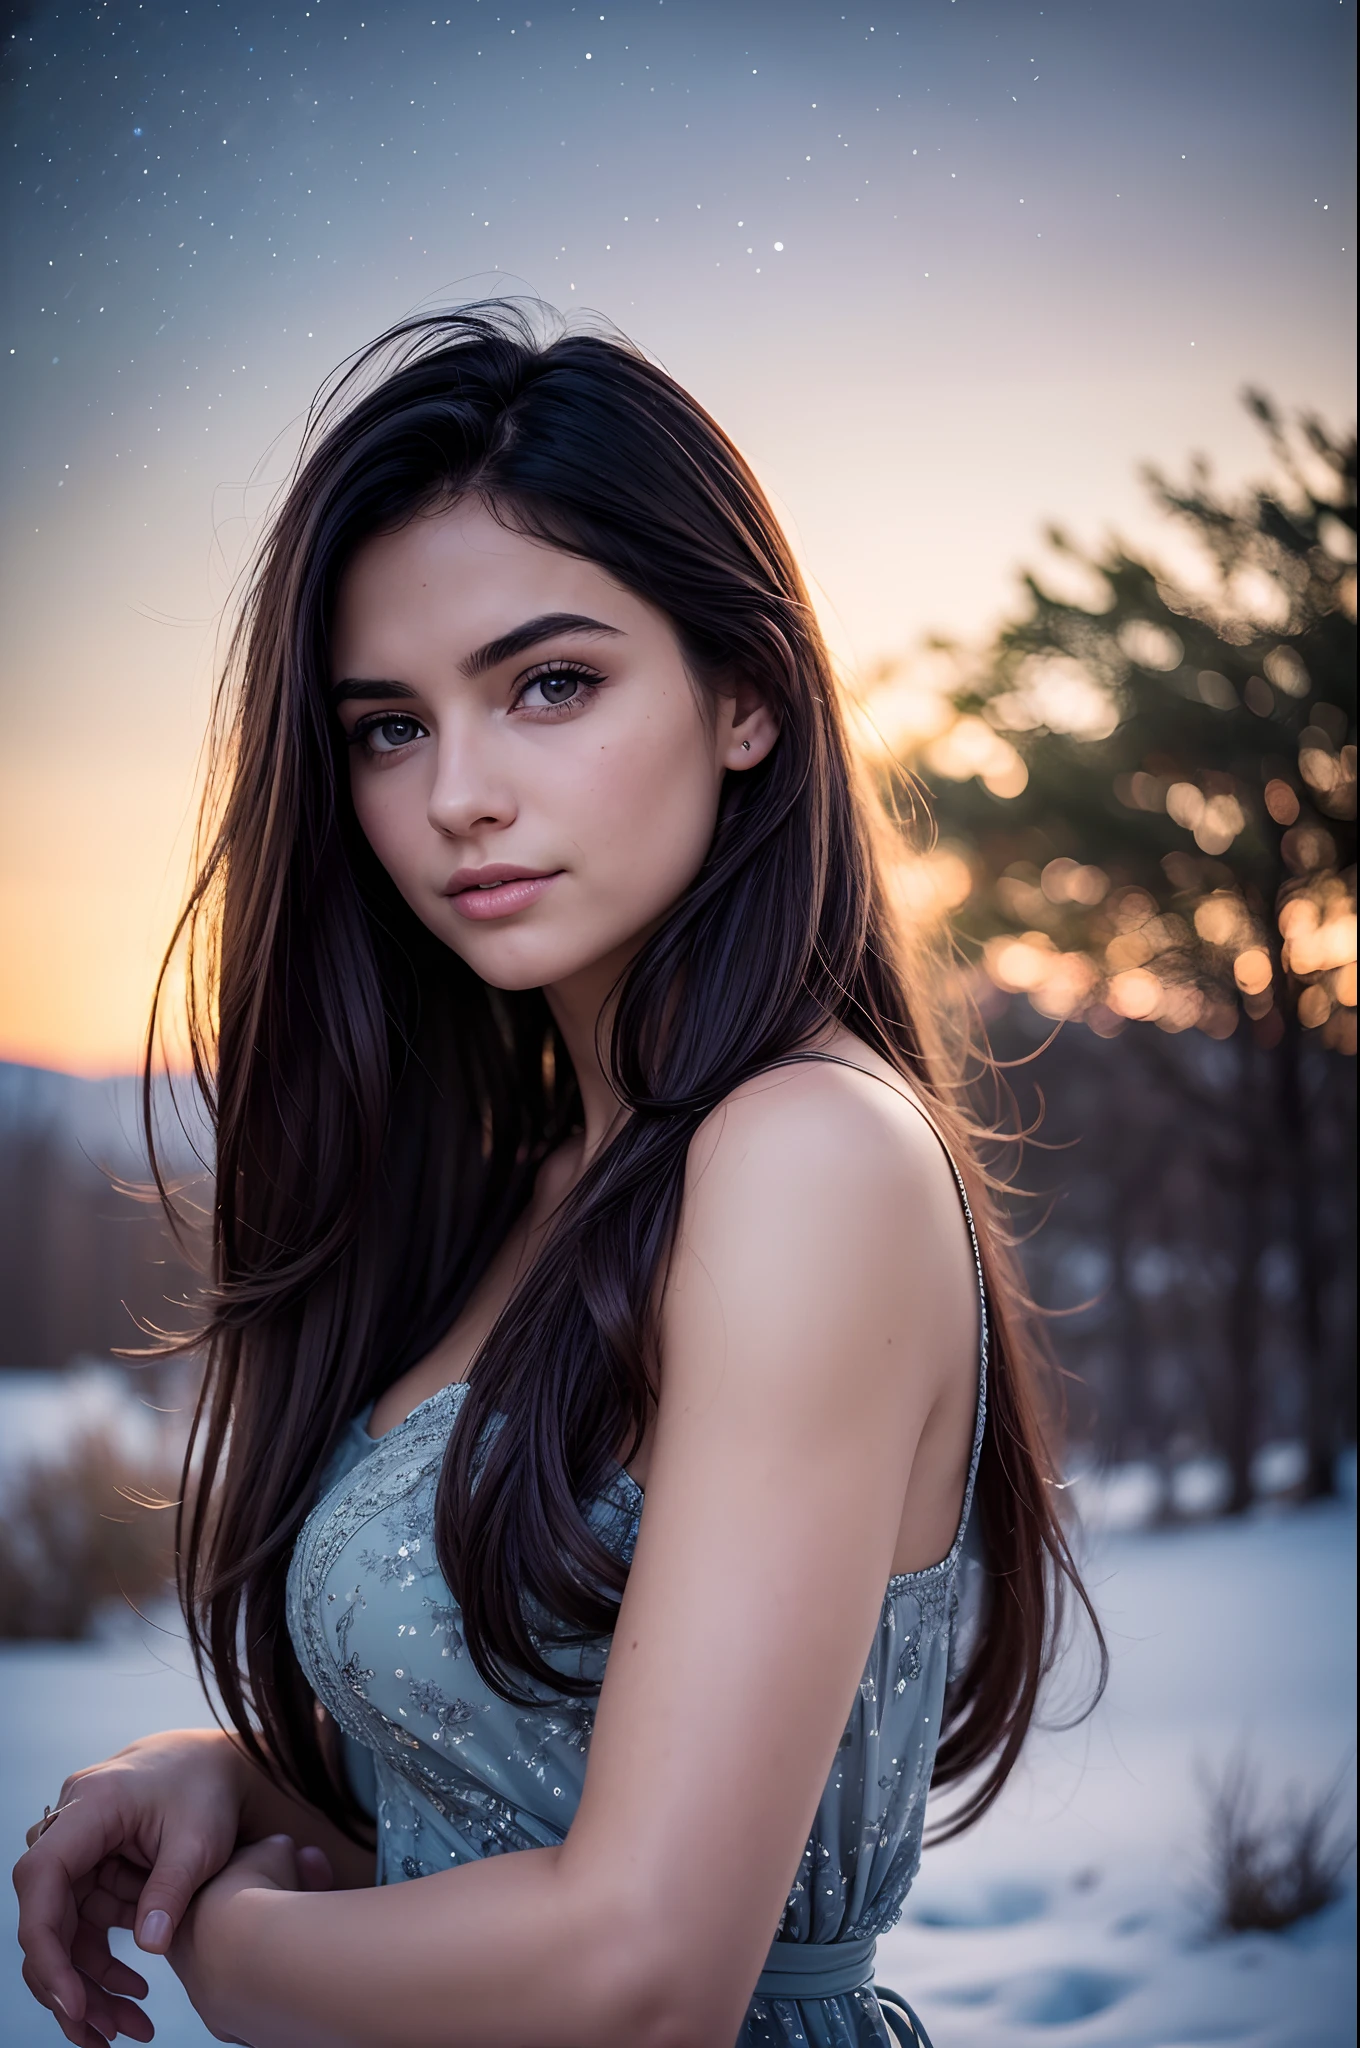 night photography, in the countryside, under the winter starry sky,
1 gorgeous woman,
23 ans, 
subtle smile, 
flirts with the camera,
she’s a model, sensual pose, 
(European girl:1.2), (random hair:1.3),
(Realistic hair:1.2),
(realistic eyes:1.2),
(Beauty face:1.3),
perfect body, 
perfect hands, 
Kodak gold 200, 
National Geographic style, medium shot,
Best quality, ultra highres, (photoreallistic:1.4), 8k,